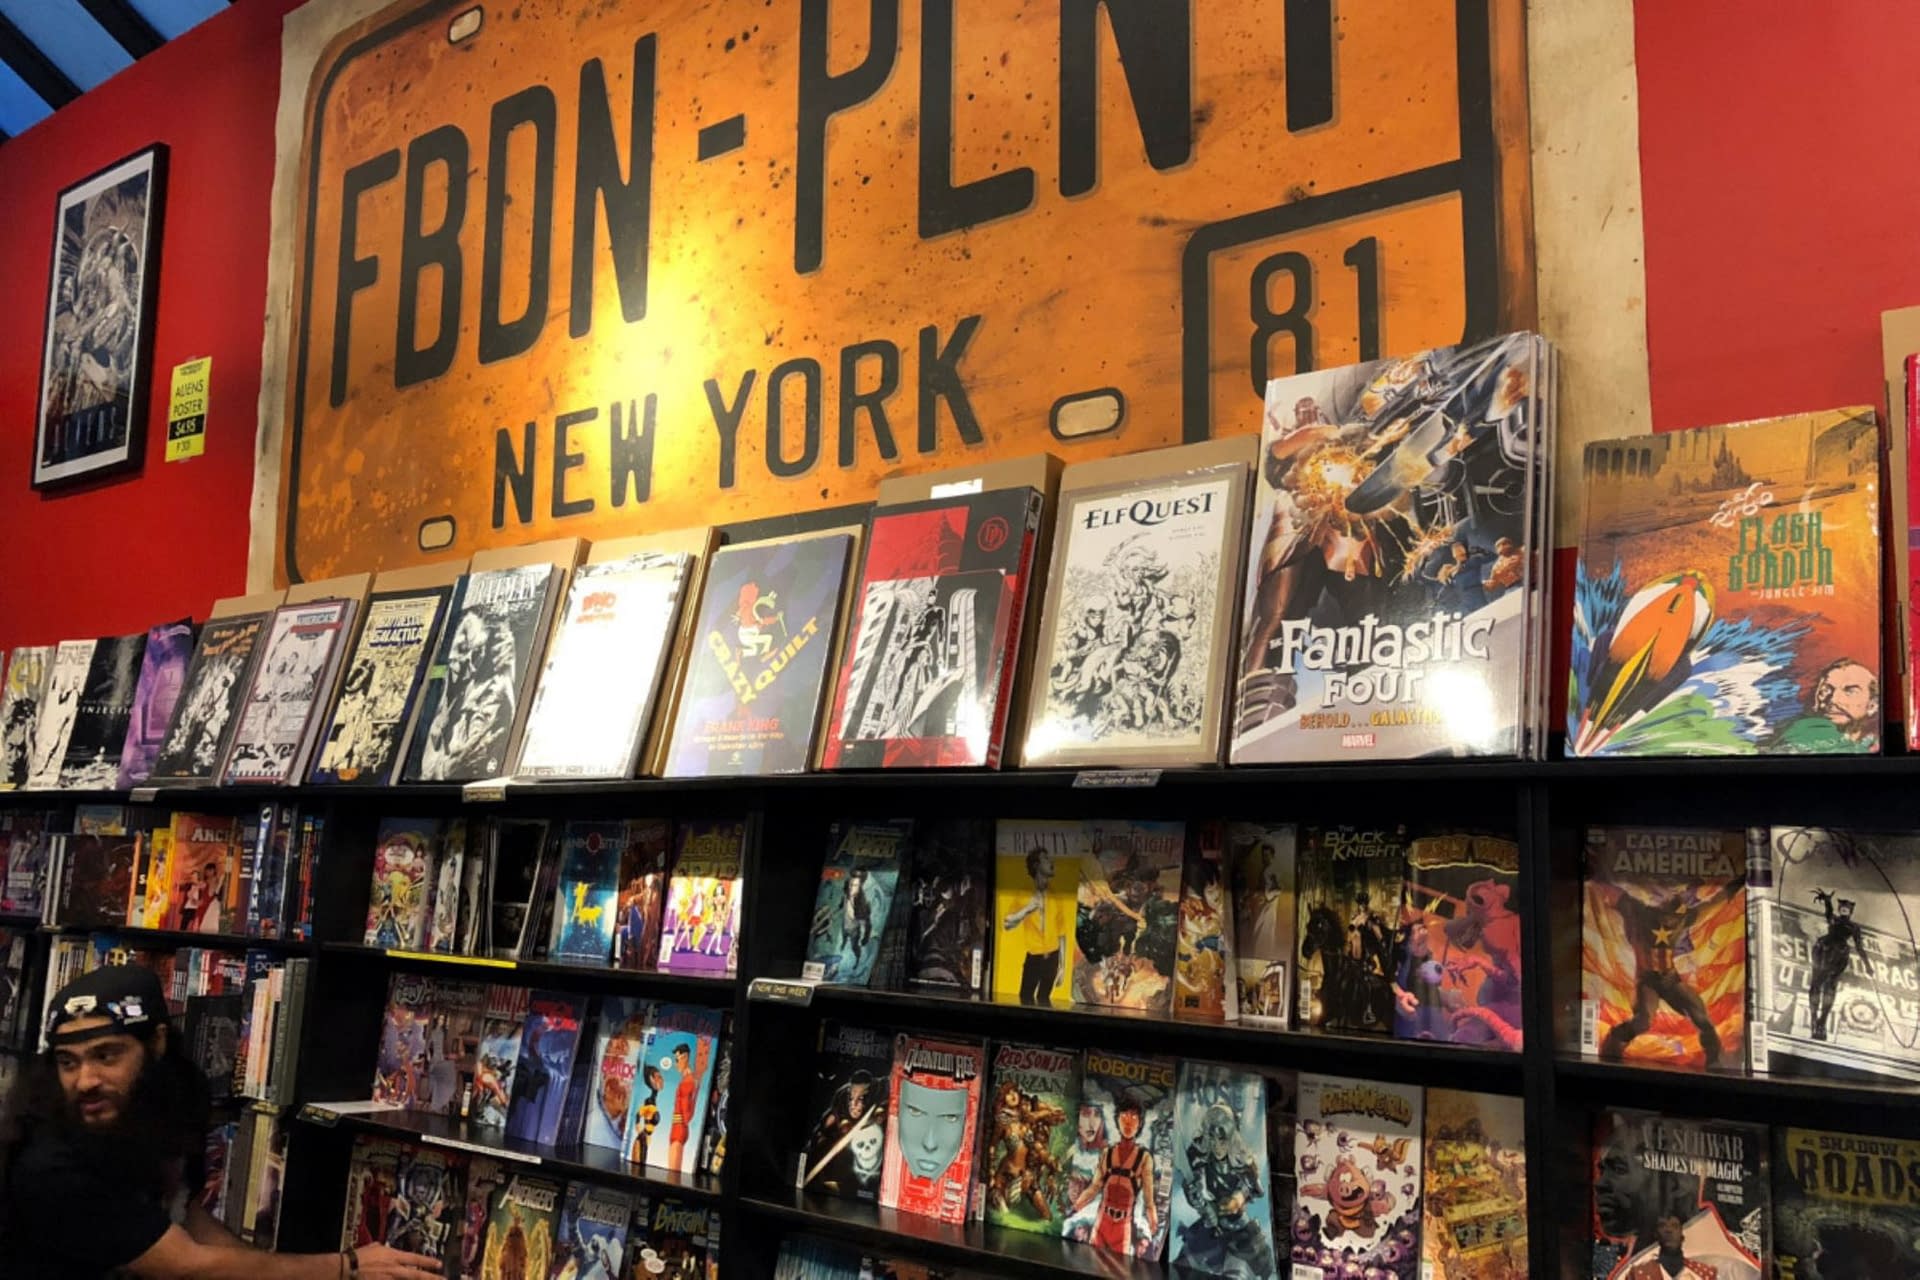 Forbidden Planet NYC on Google Offers Again - The Daily Planet